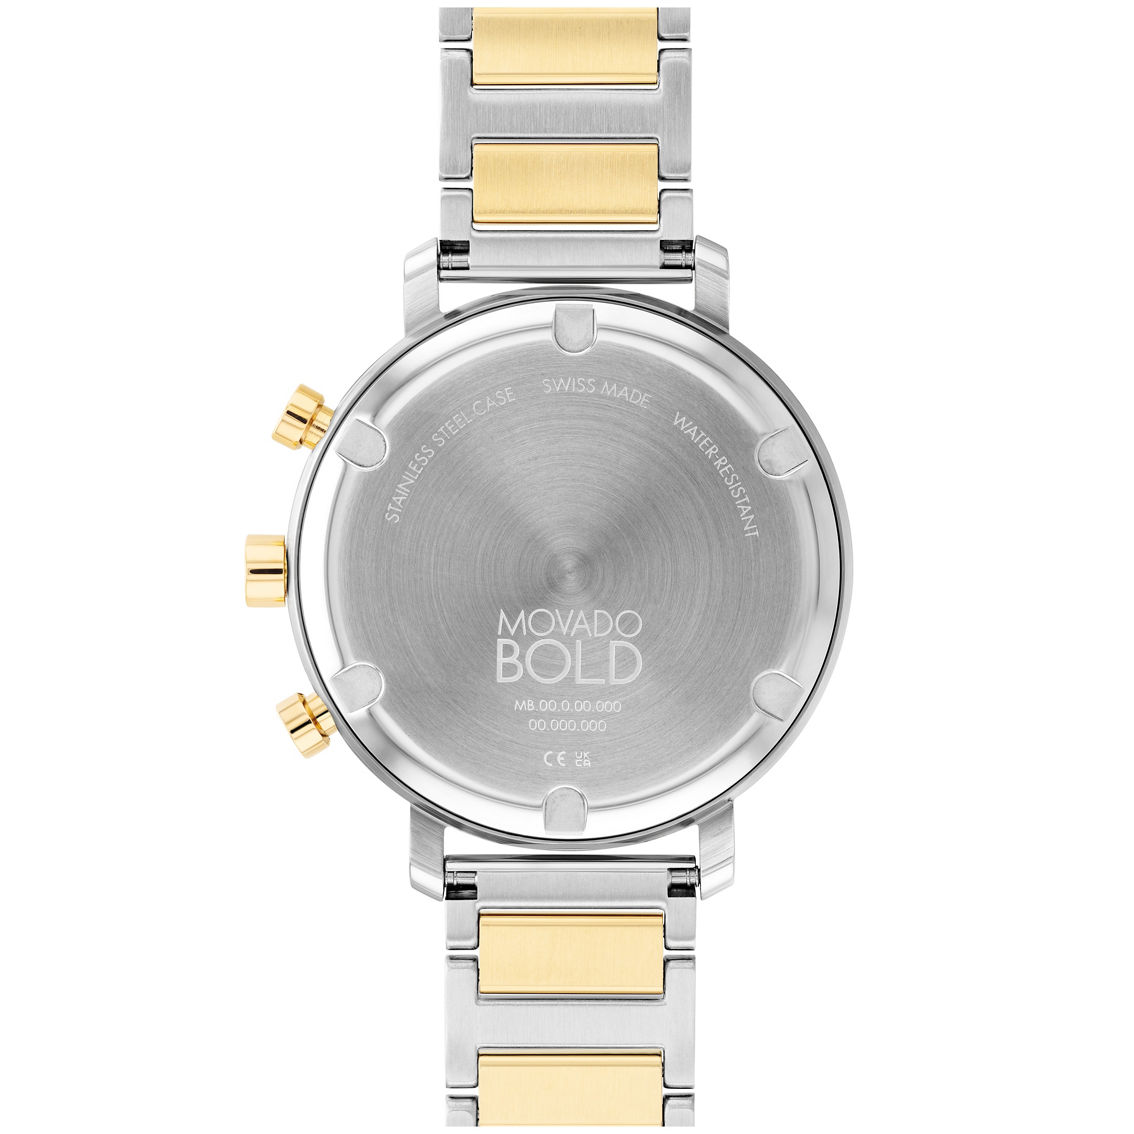 Movado Women's Bold Evolution Two Tone Stainless Steel Watch 3600885 - Image 2 of 3